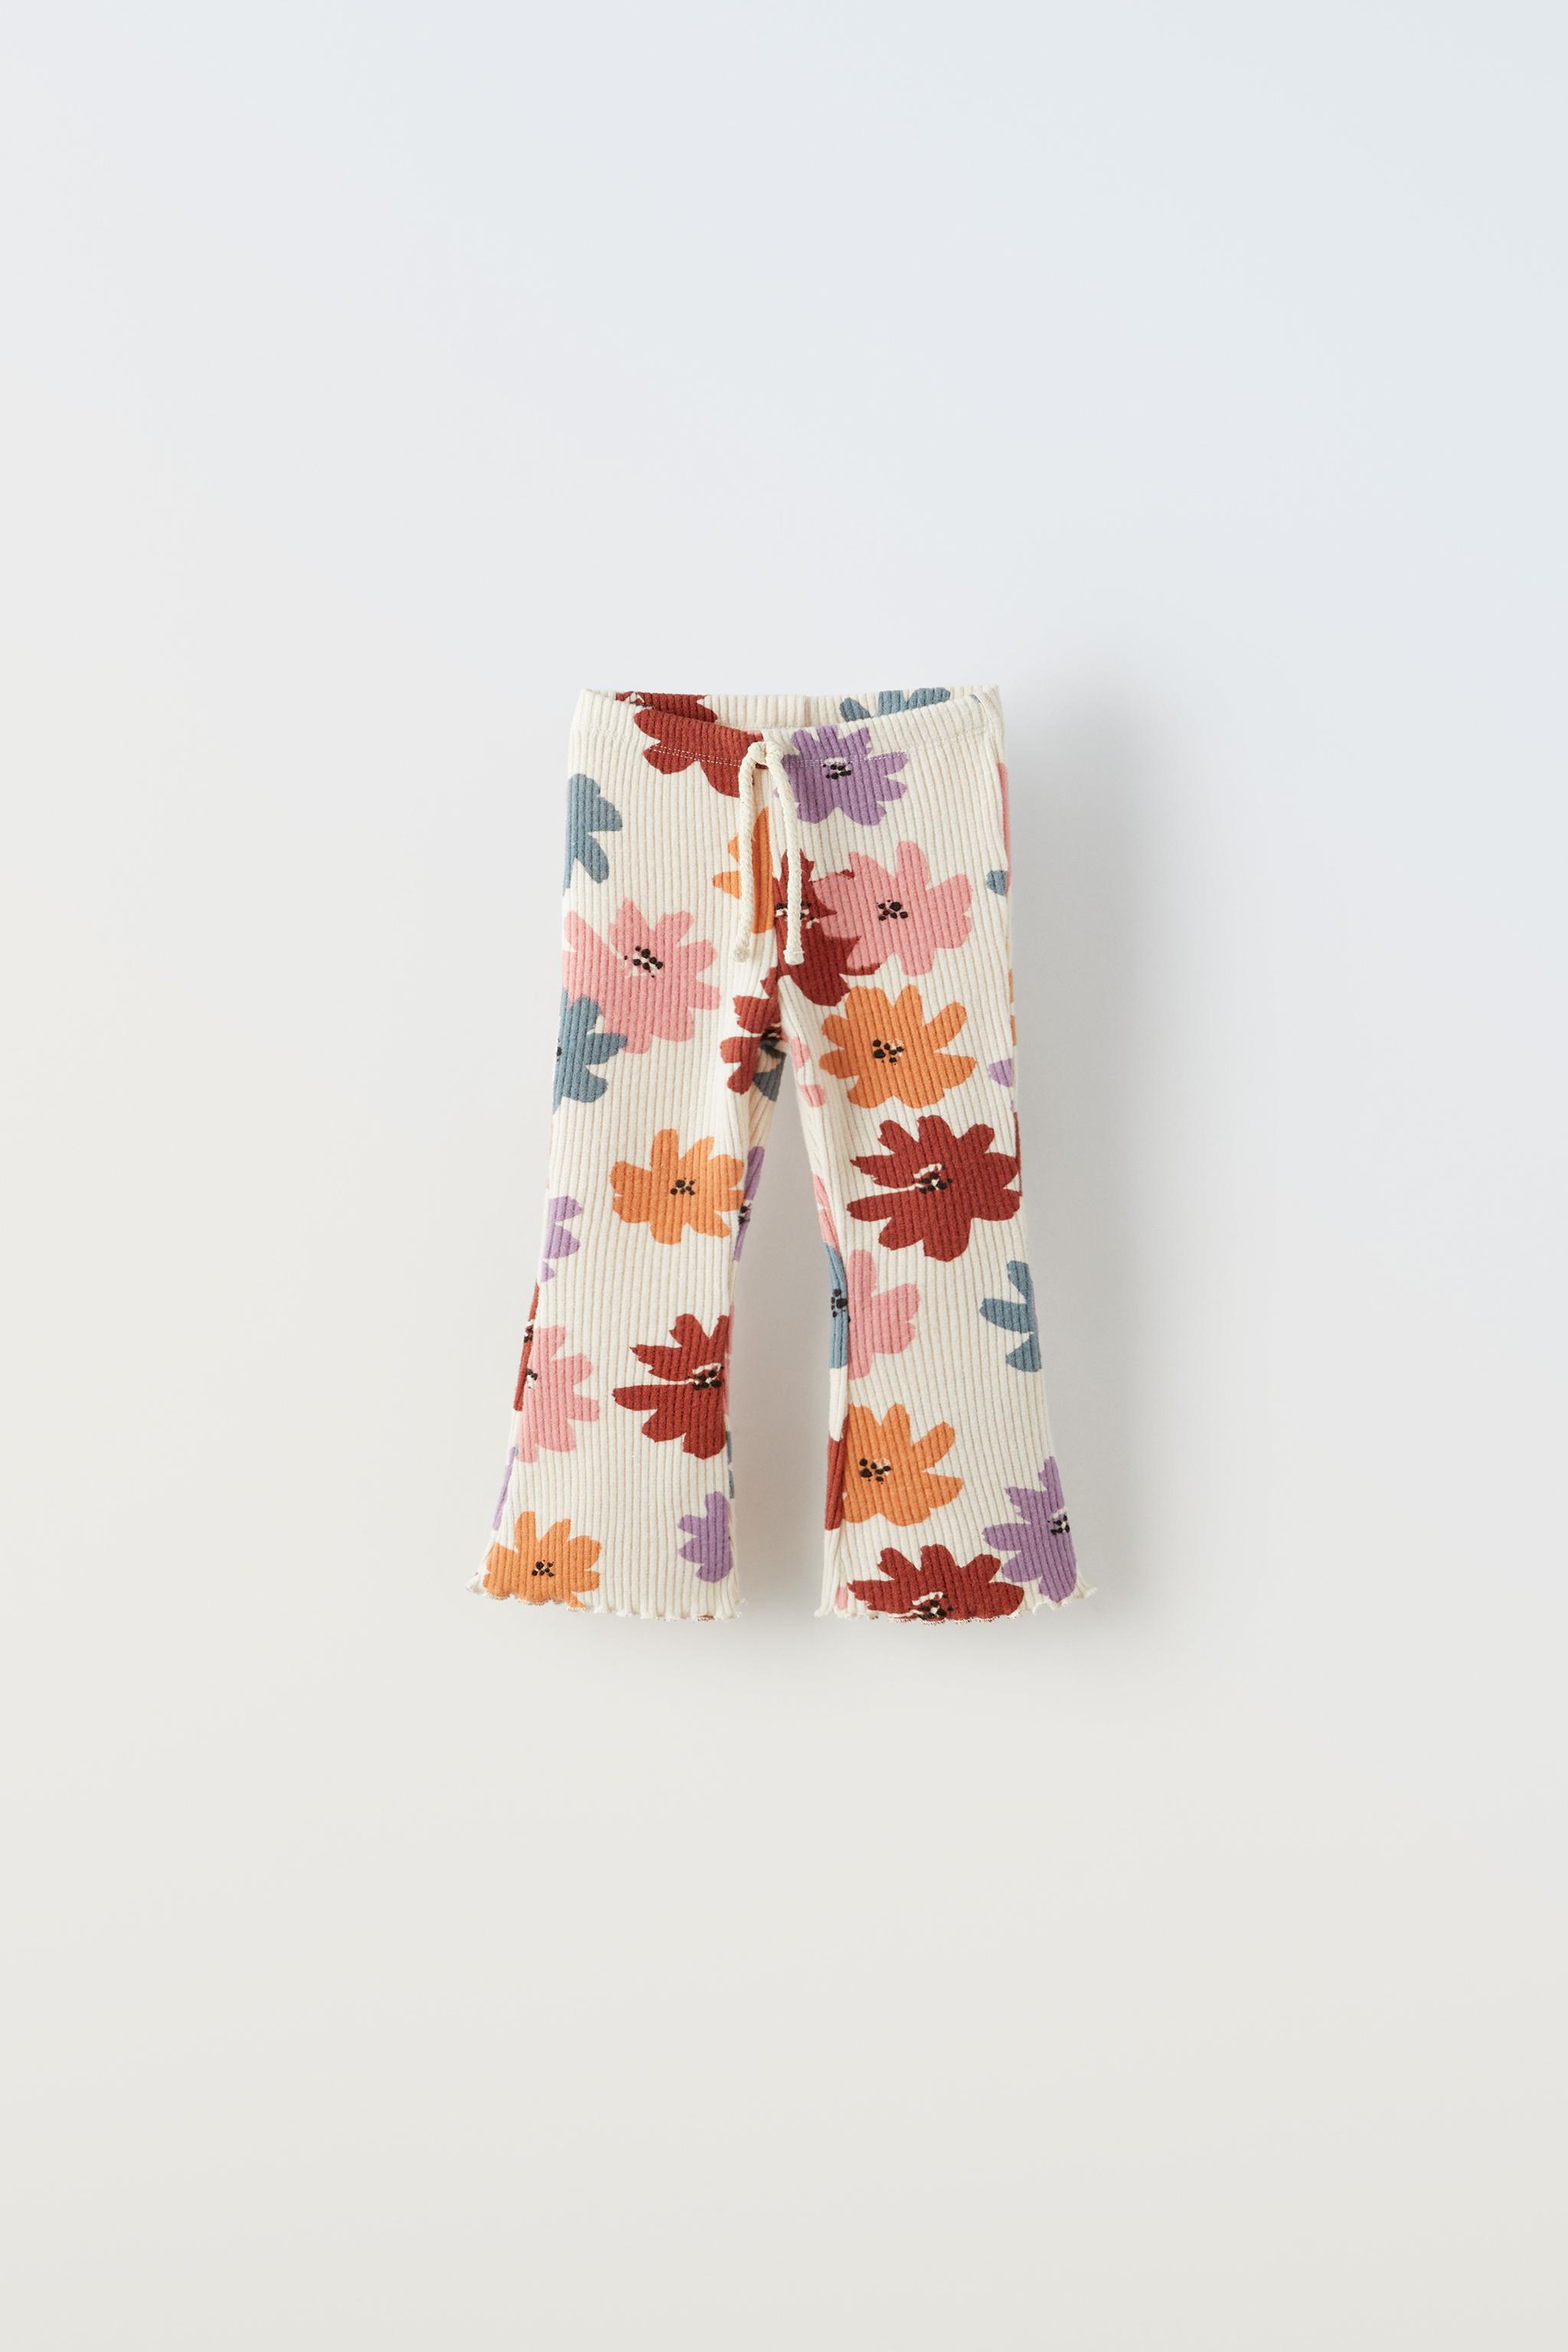 SOFT TOUCH FLORAL PANTS - Multicolored